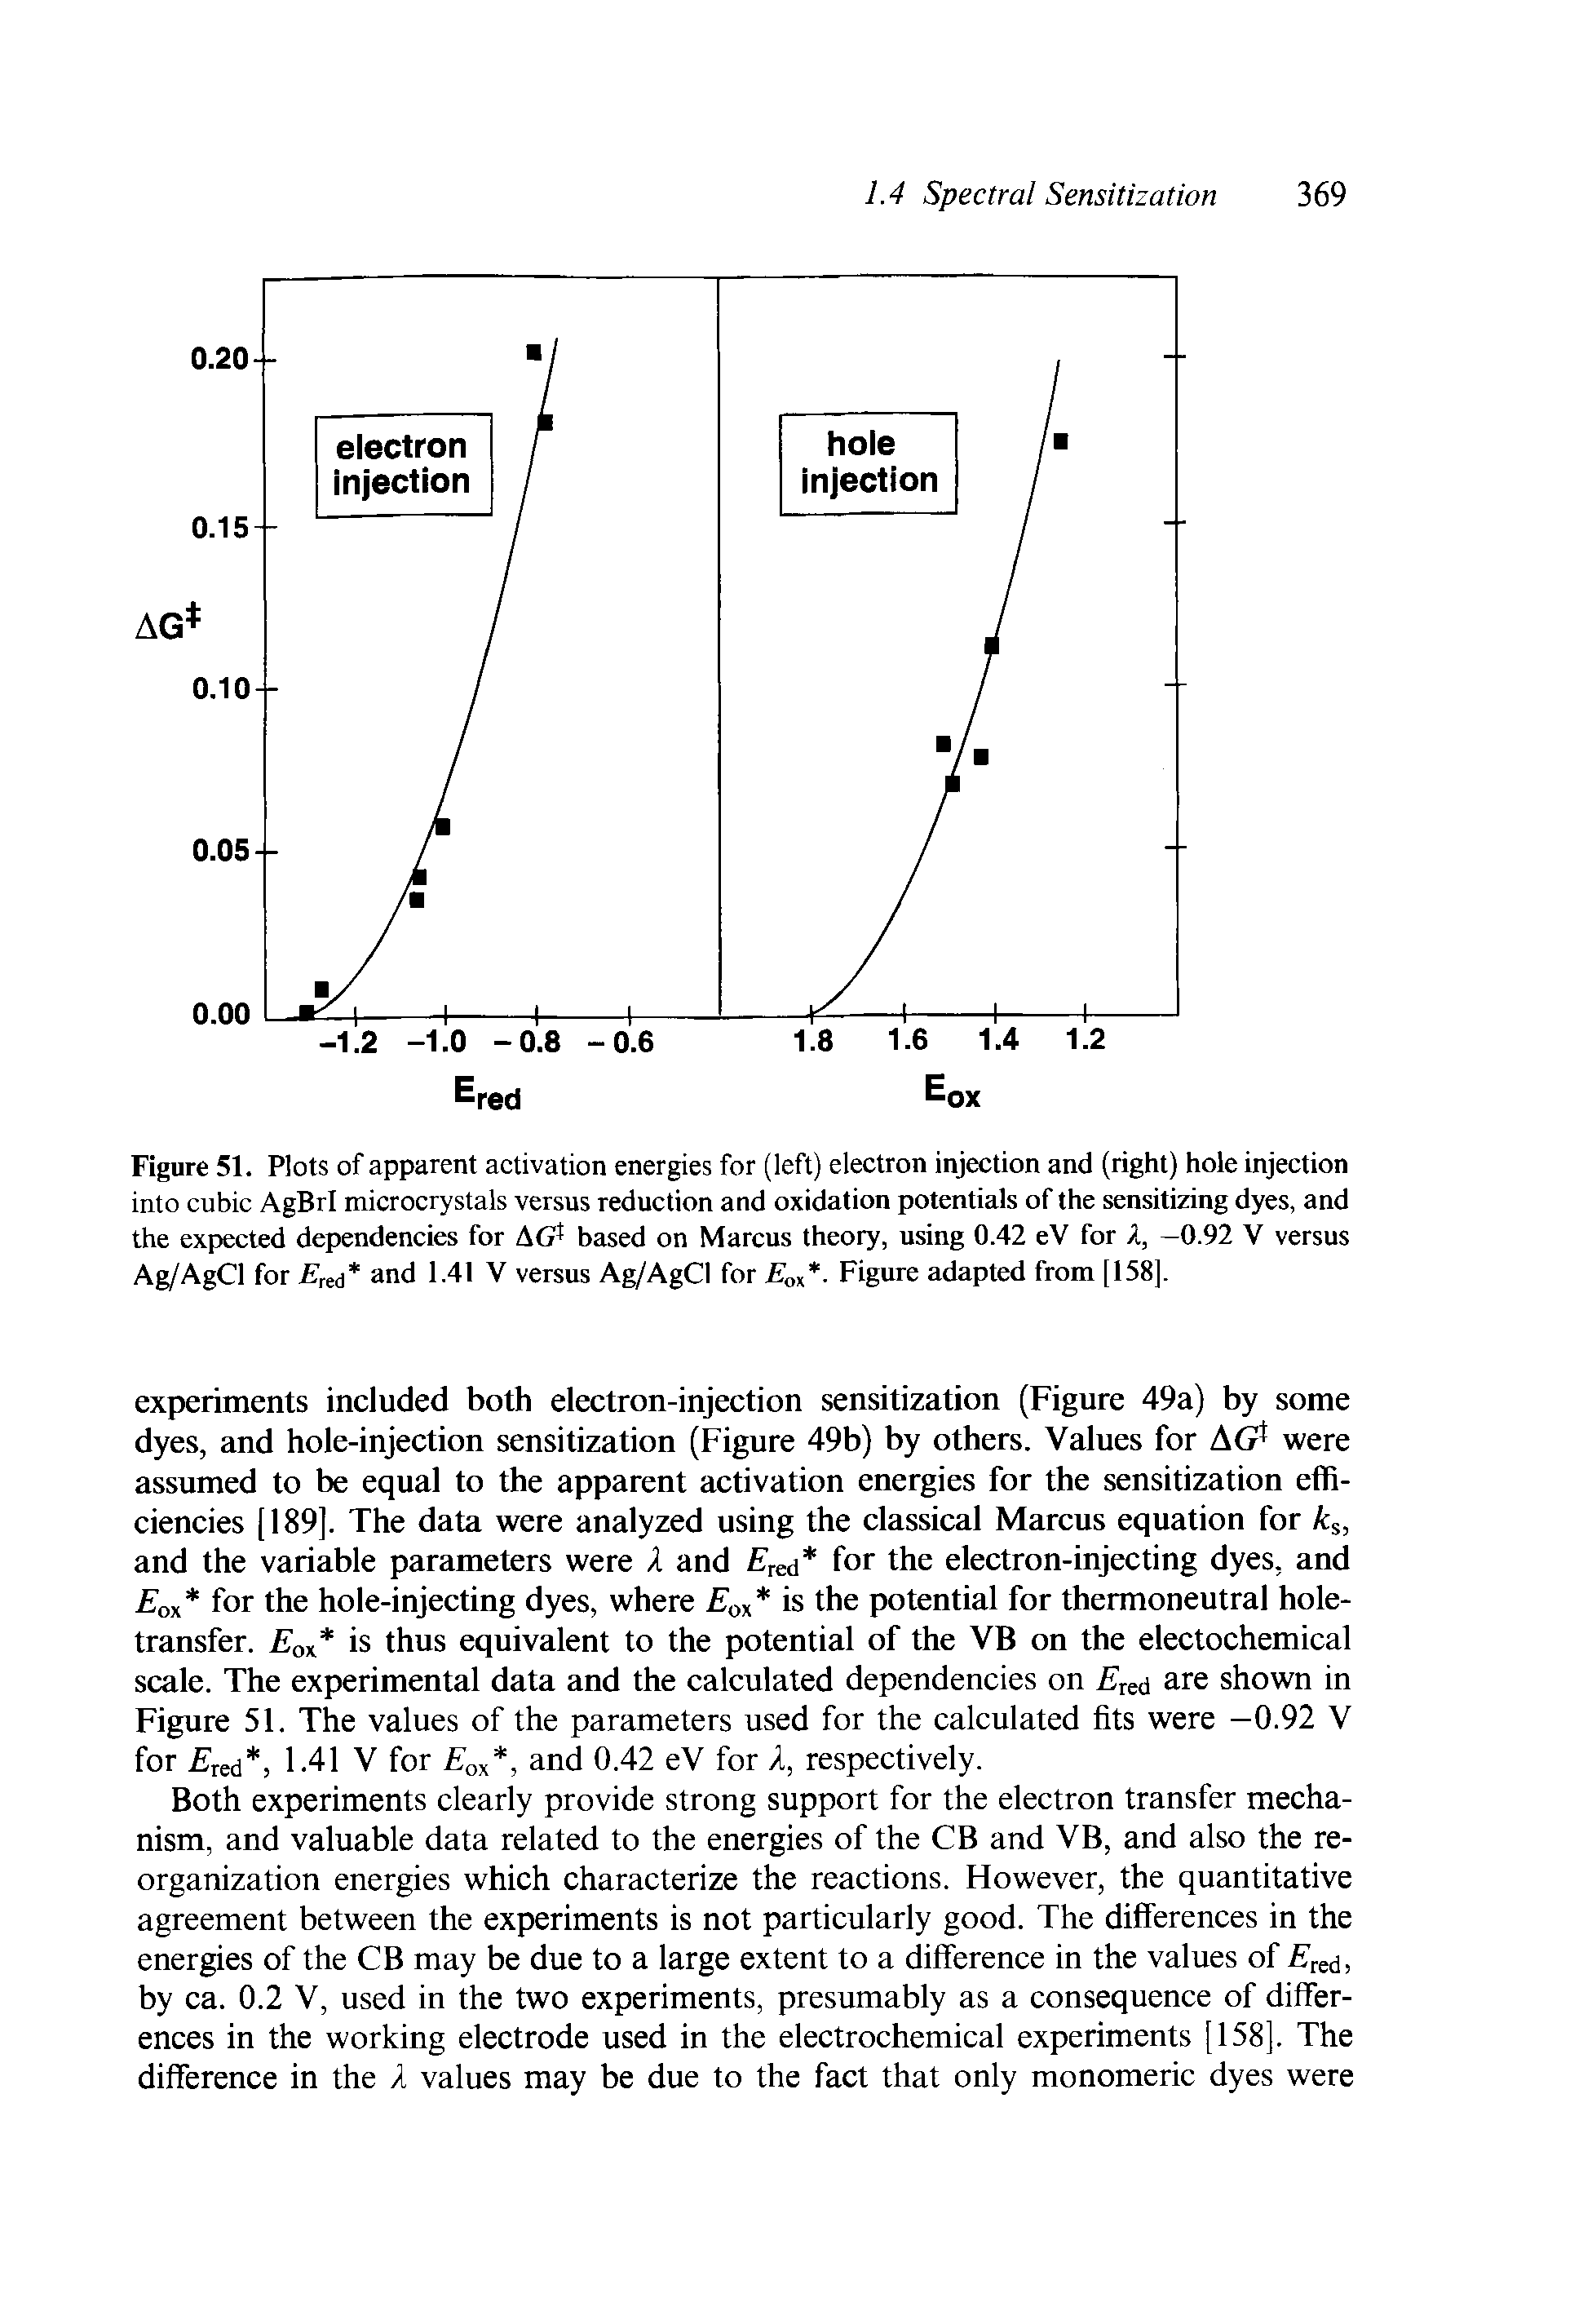 Figure 51. Plots of apparent activation energies for (left) electron injection and (right) hole injection into cubic AgBrI microcrystals versus reduction and oxidation potentials of the sensitizing dyes, and the expected dependencies for AG based on Marcus theory, using 0.42 eV for A, —0.92 V versus Ag/AgCl for red and 1.41 V versus Ag/AgCl for E ox. Figure adapted from [158].